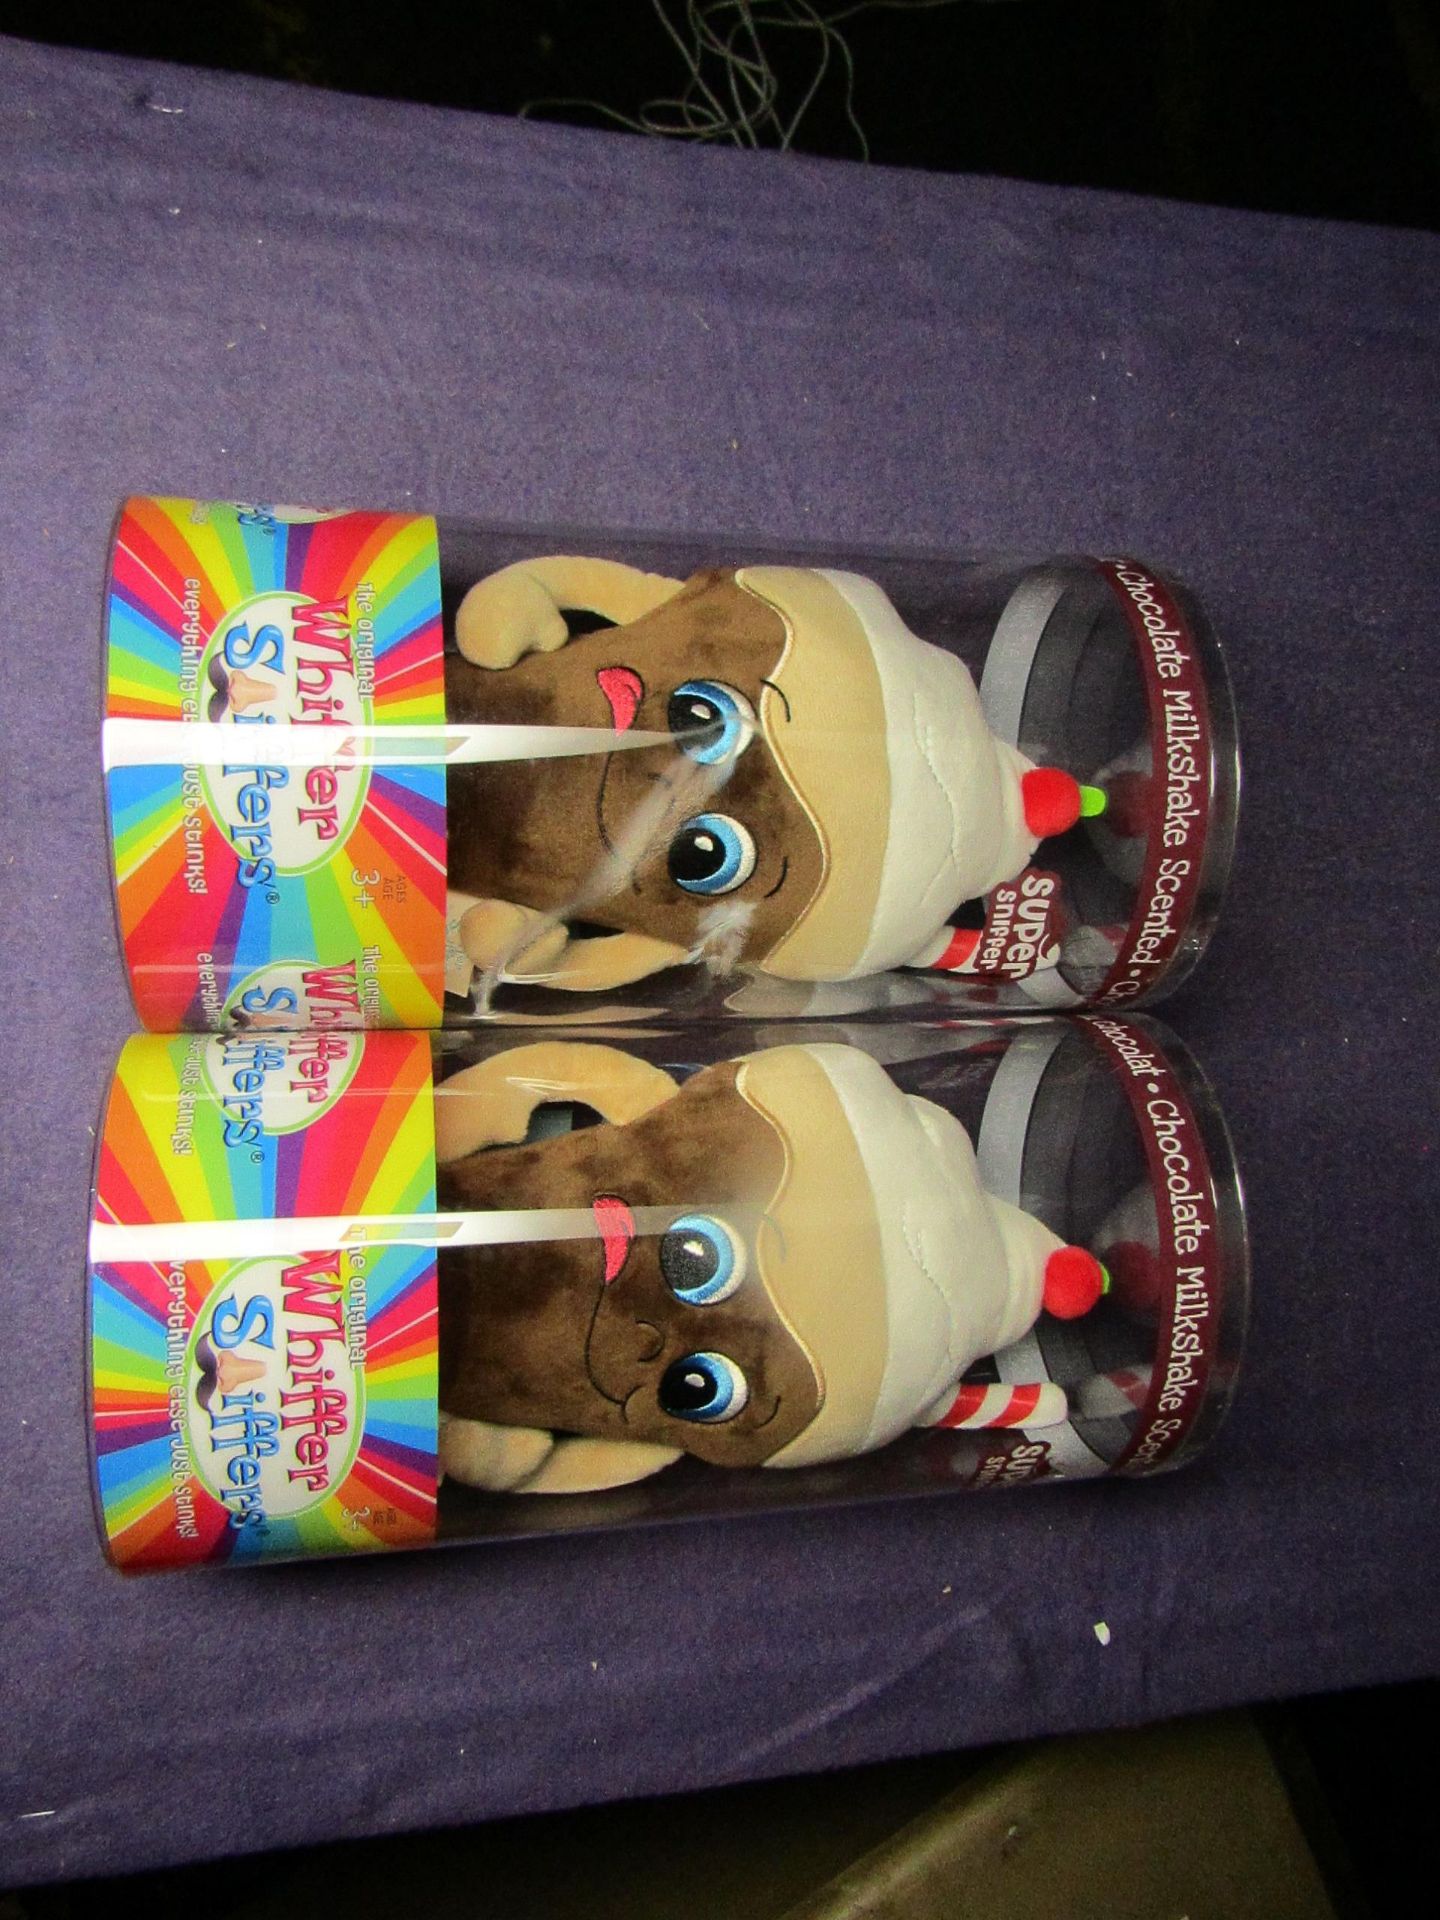 2x Whiffer Sniffers - Chocolate Milkshake Scented Plush Toy - Unused & Packaged.